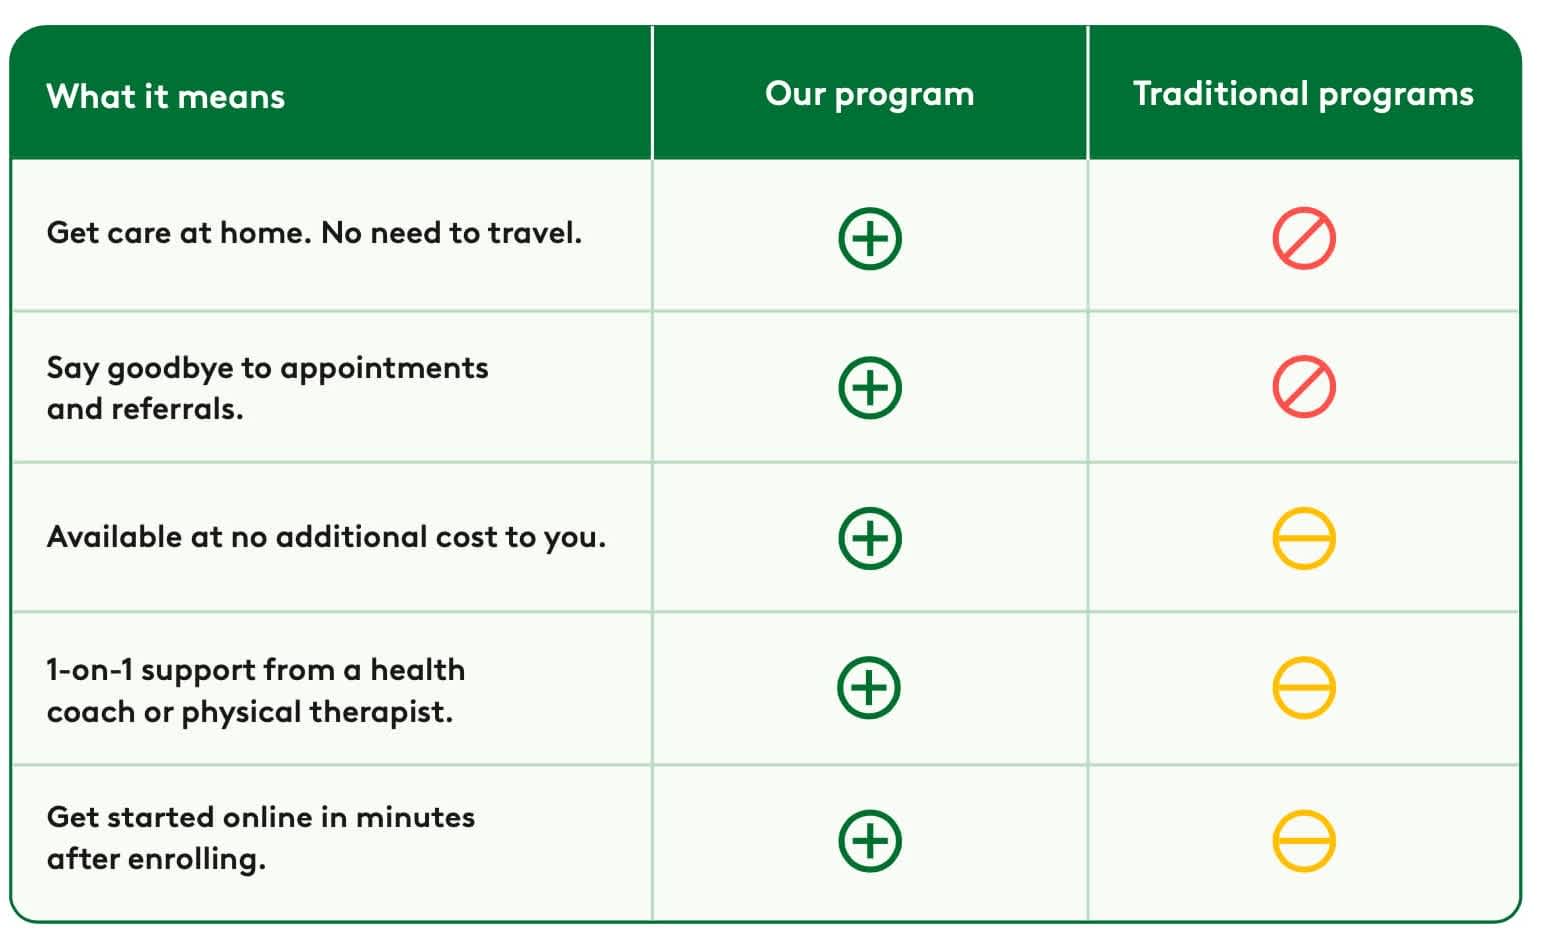 Table showing a comparison of benefits offered by Hinge Health vs traditional programs